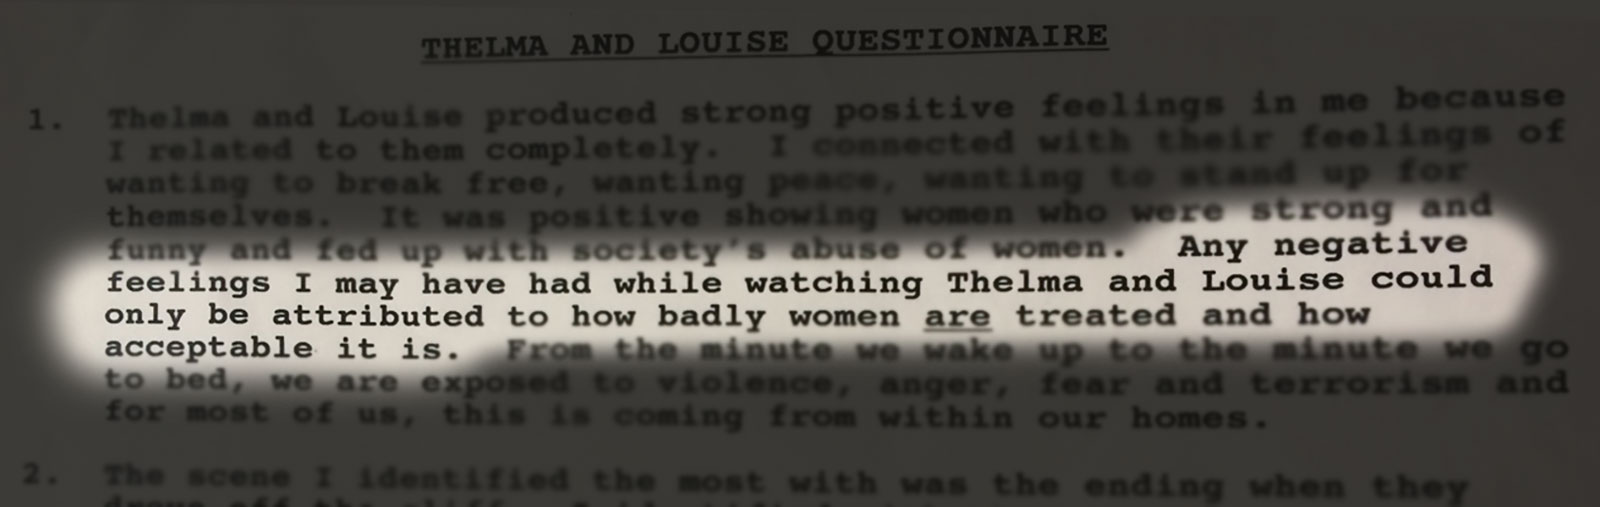 Quote from questionnaire: Any negative feelings I may have had while watching Thelma and Louise could only be attributed to how badly women are treated and how acceptable it is.